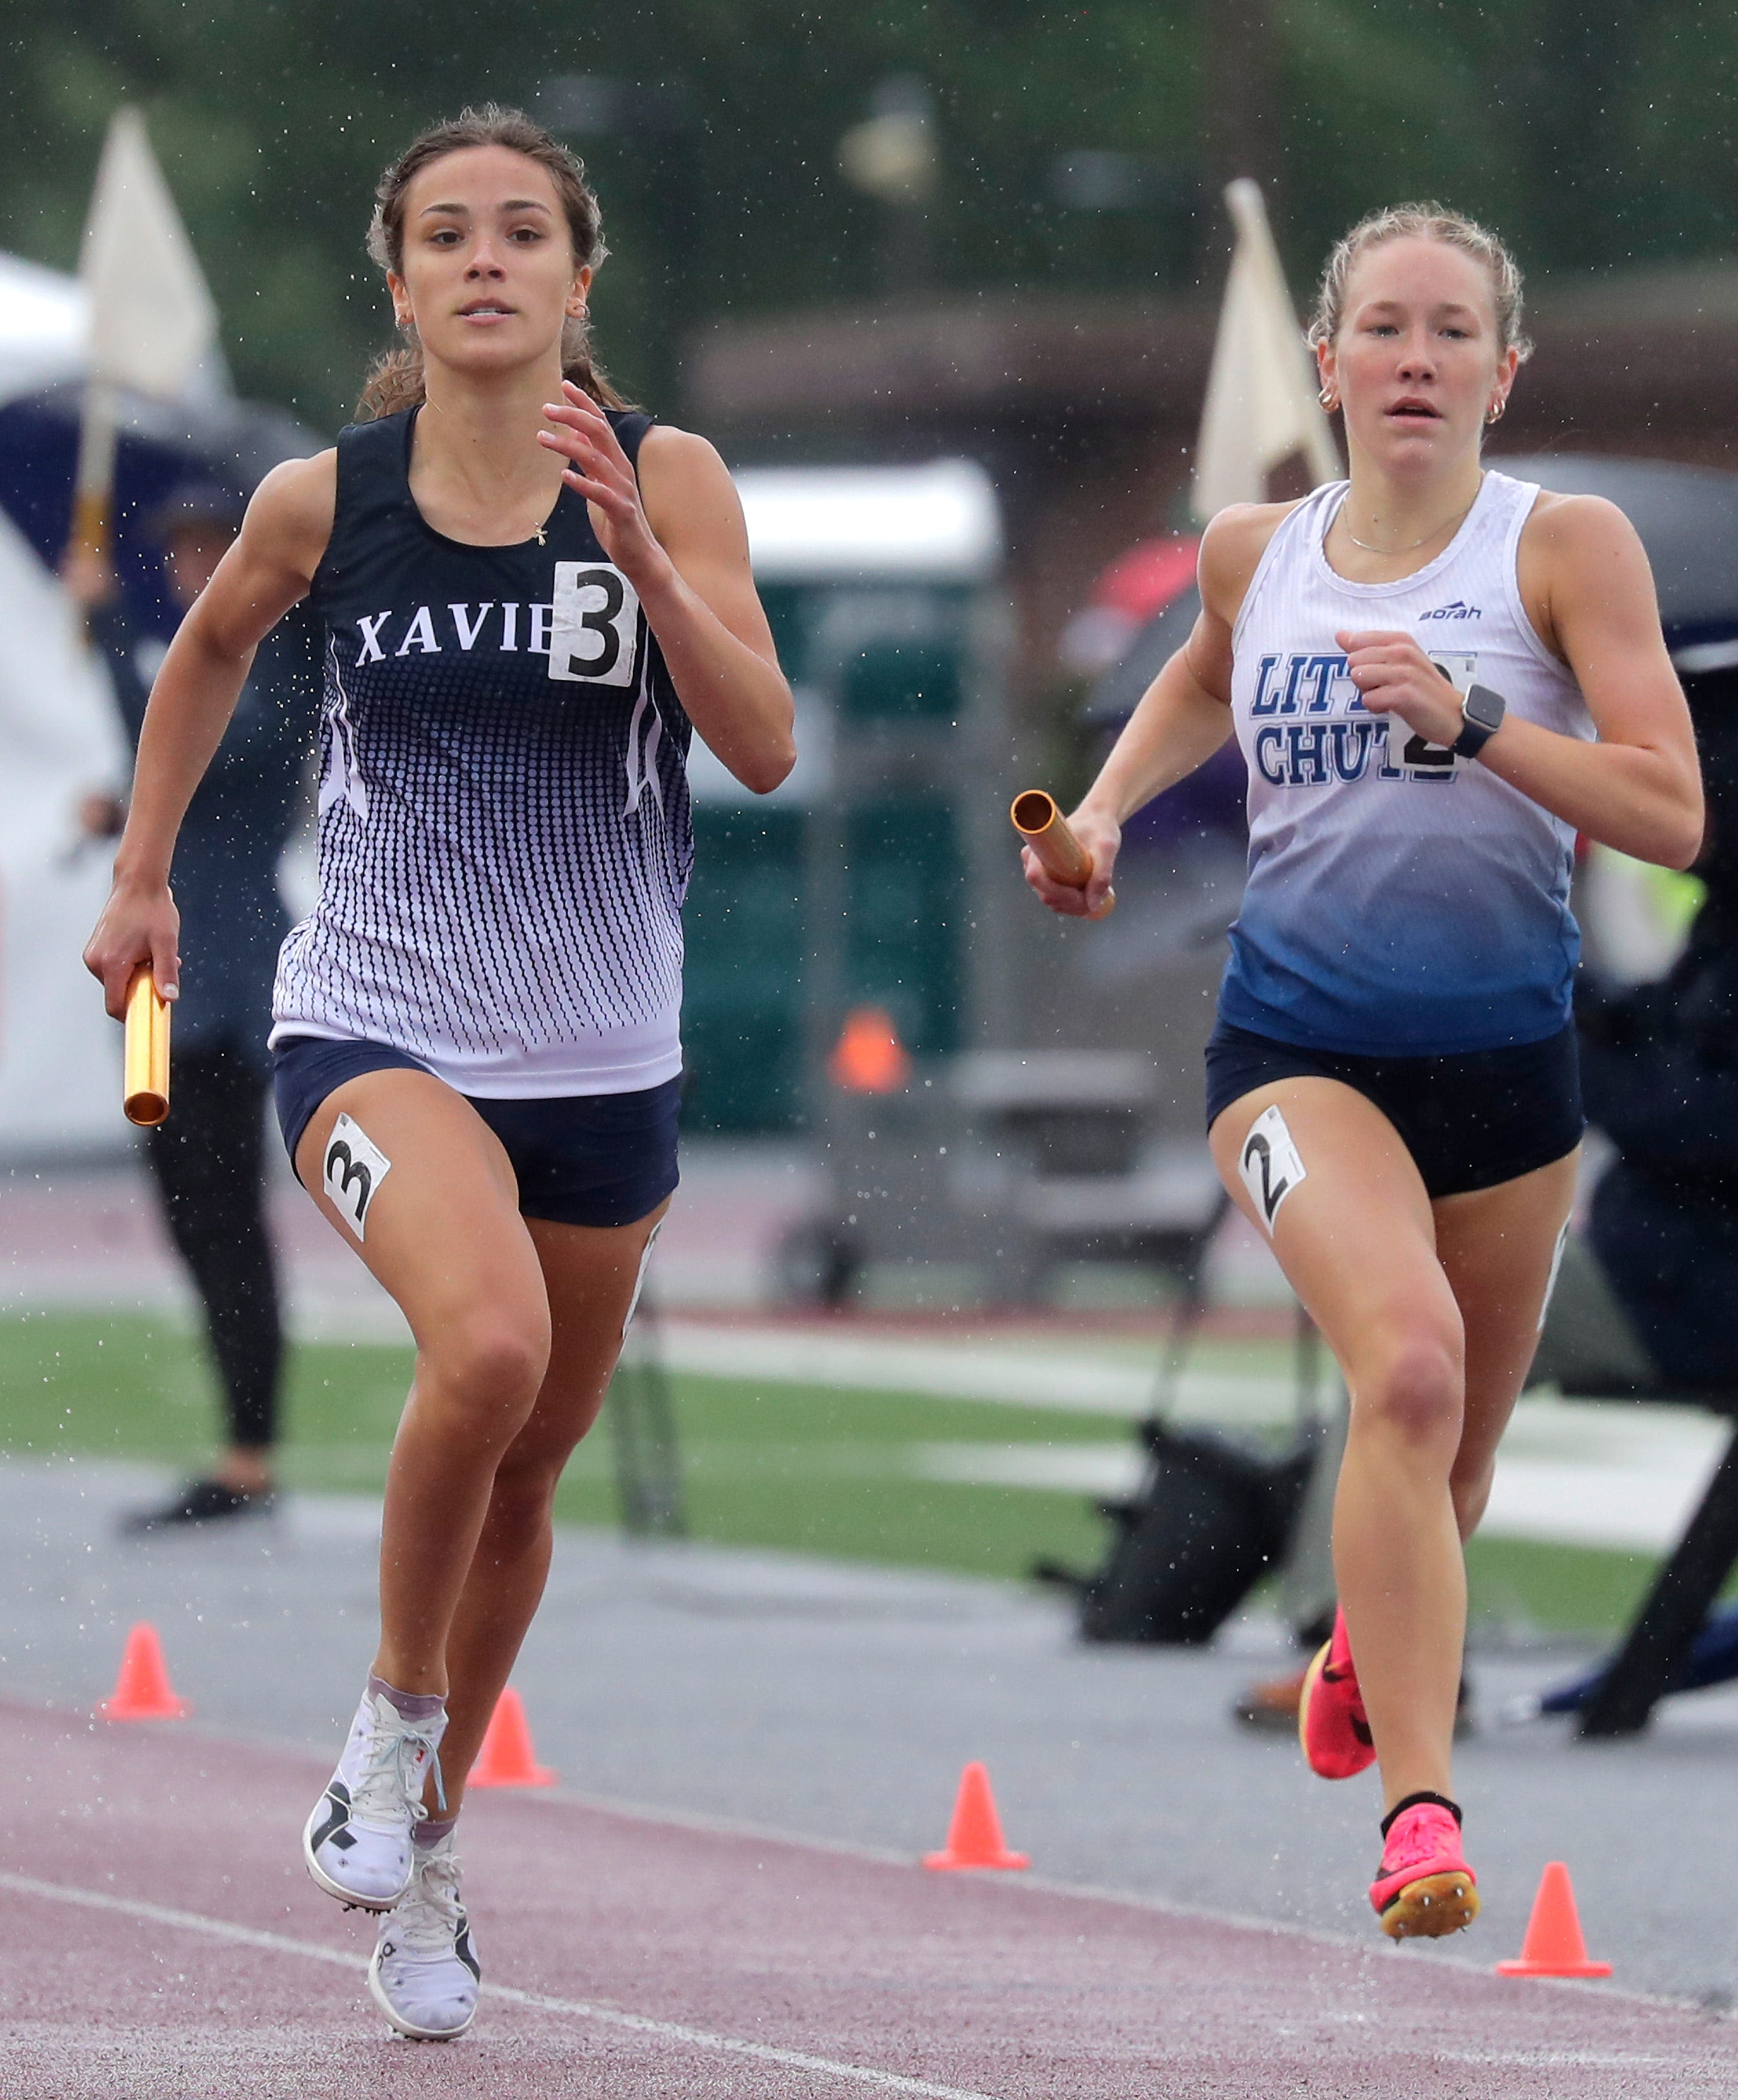 Xavier relay team, Freedom's Merrick gain redemption in winning silver medals at WIAA state track and field meet